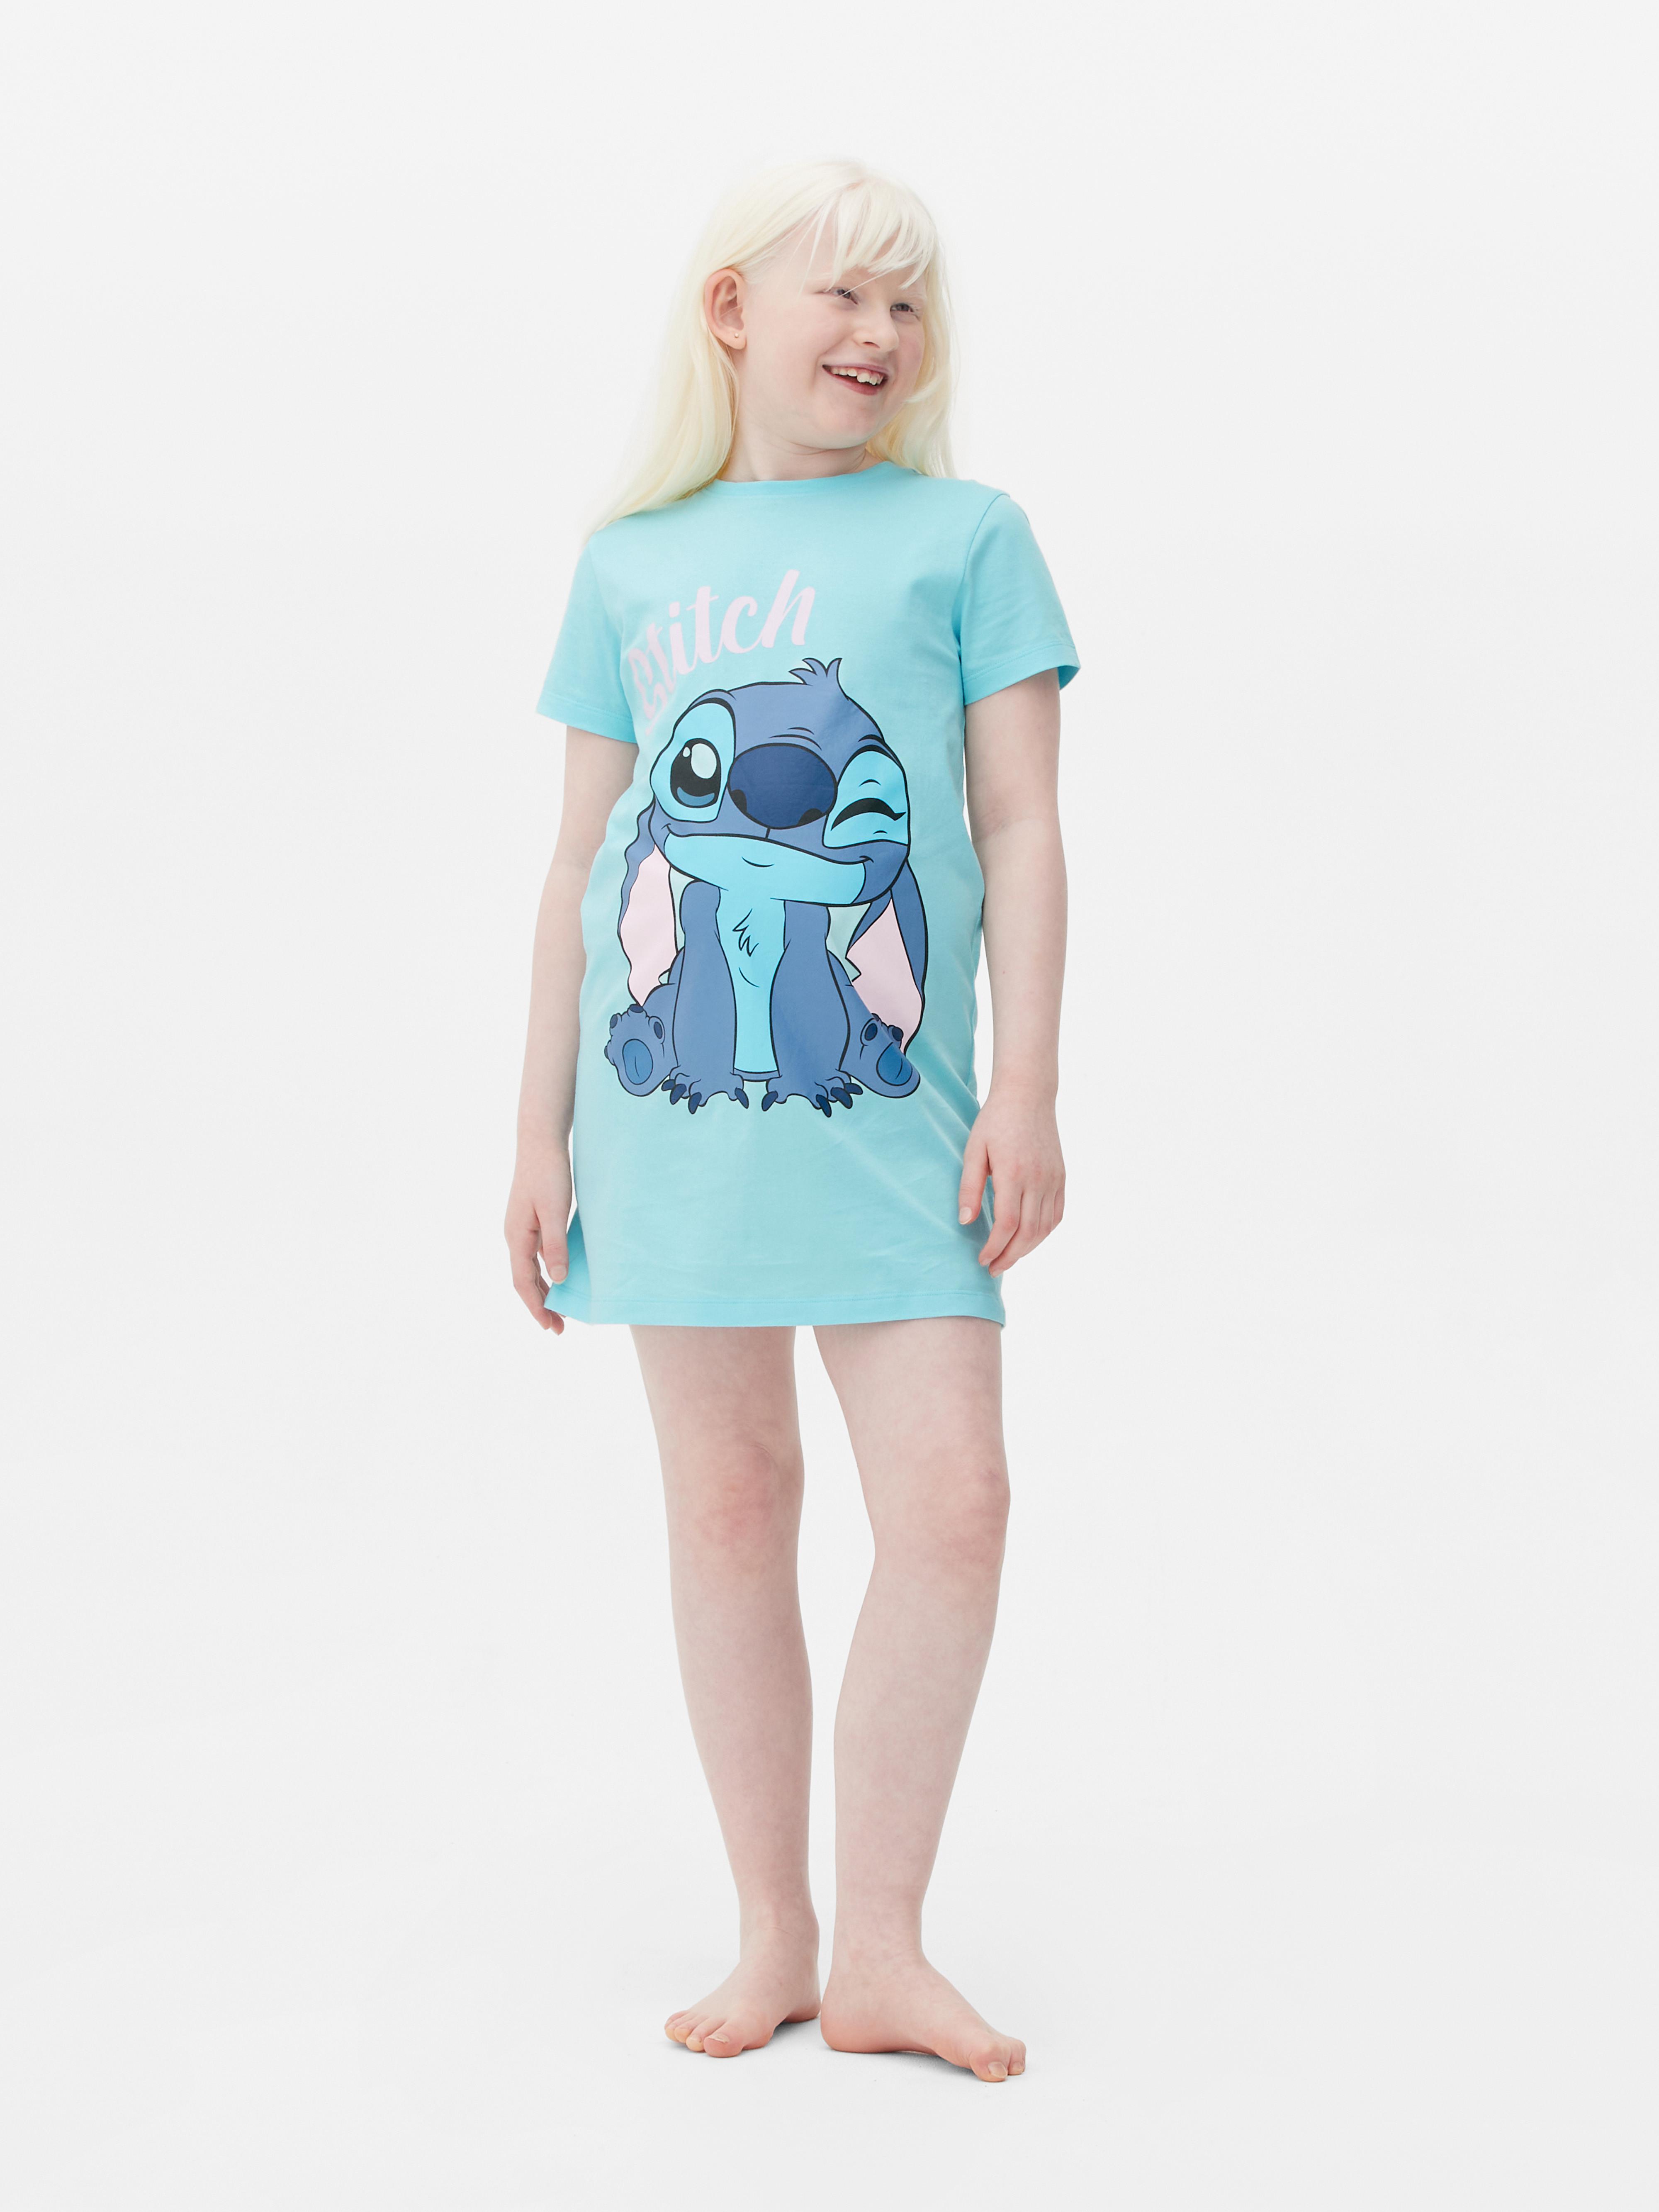 New in Lilo and Stitch collection 🩵 #primark #primarkirvine #primarkn